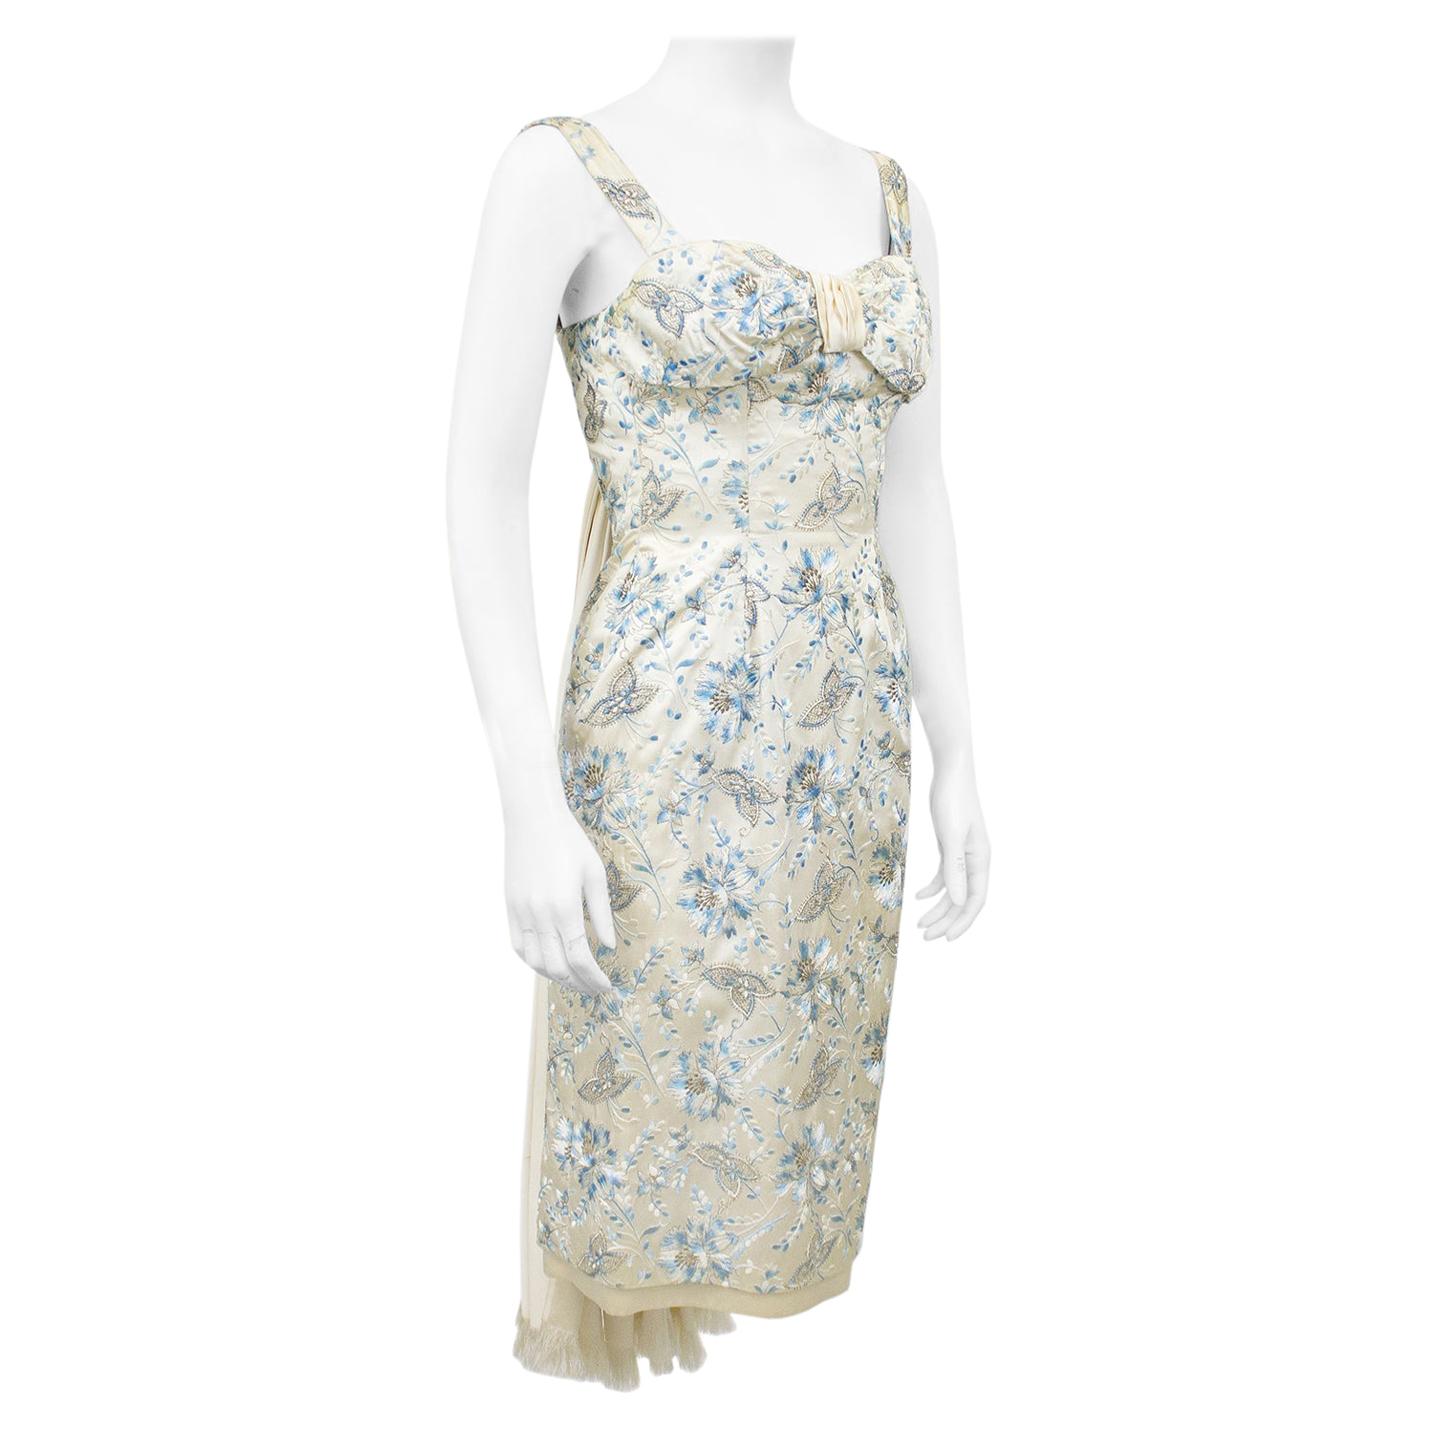 1960s Cream and Blue Floral Embroidered Satin Cocktail Dress